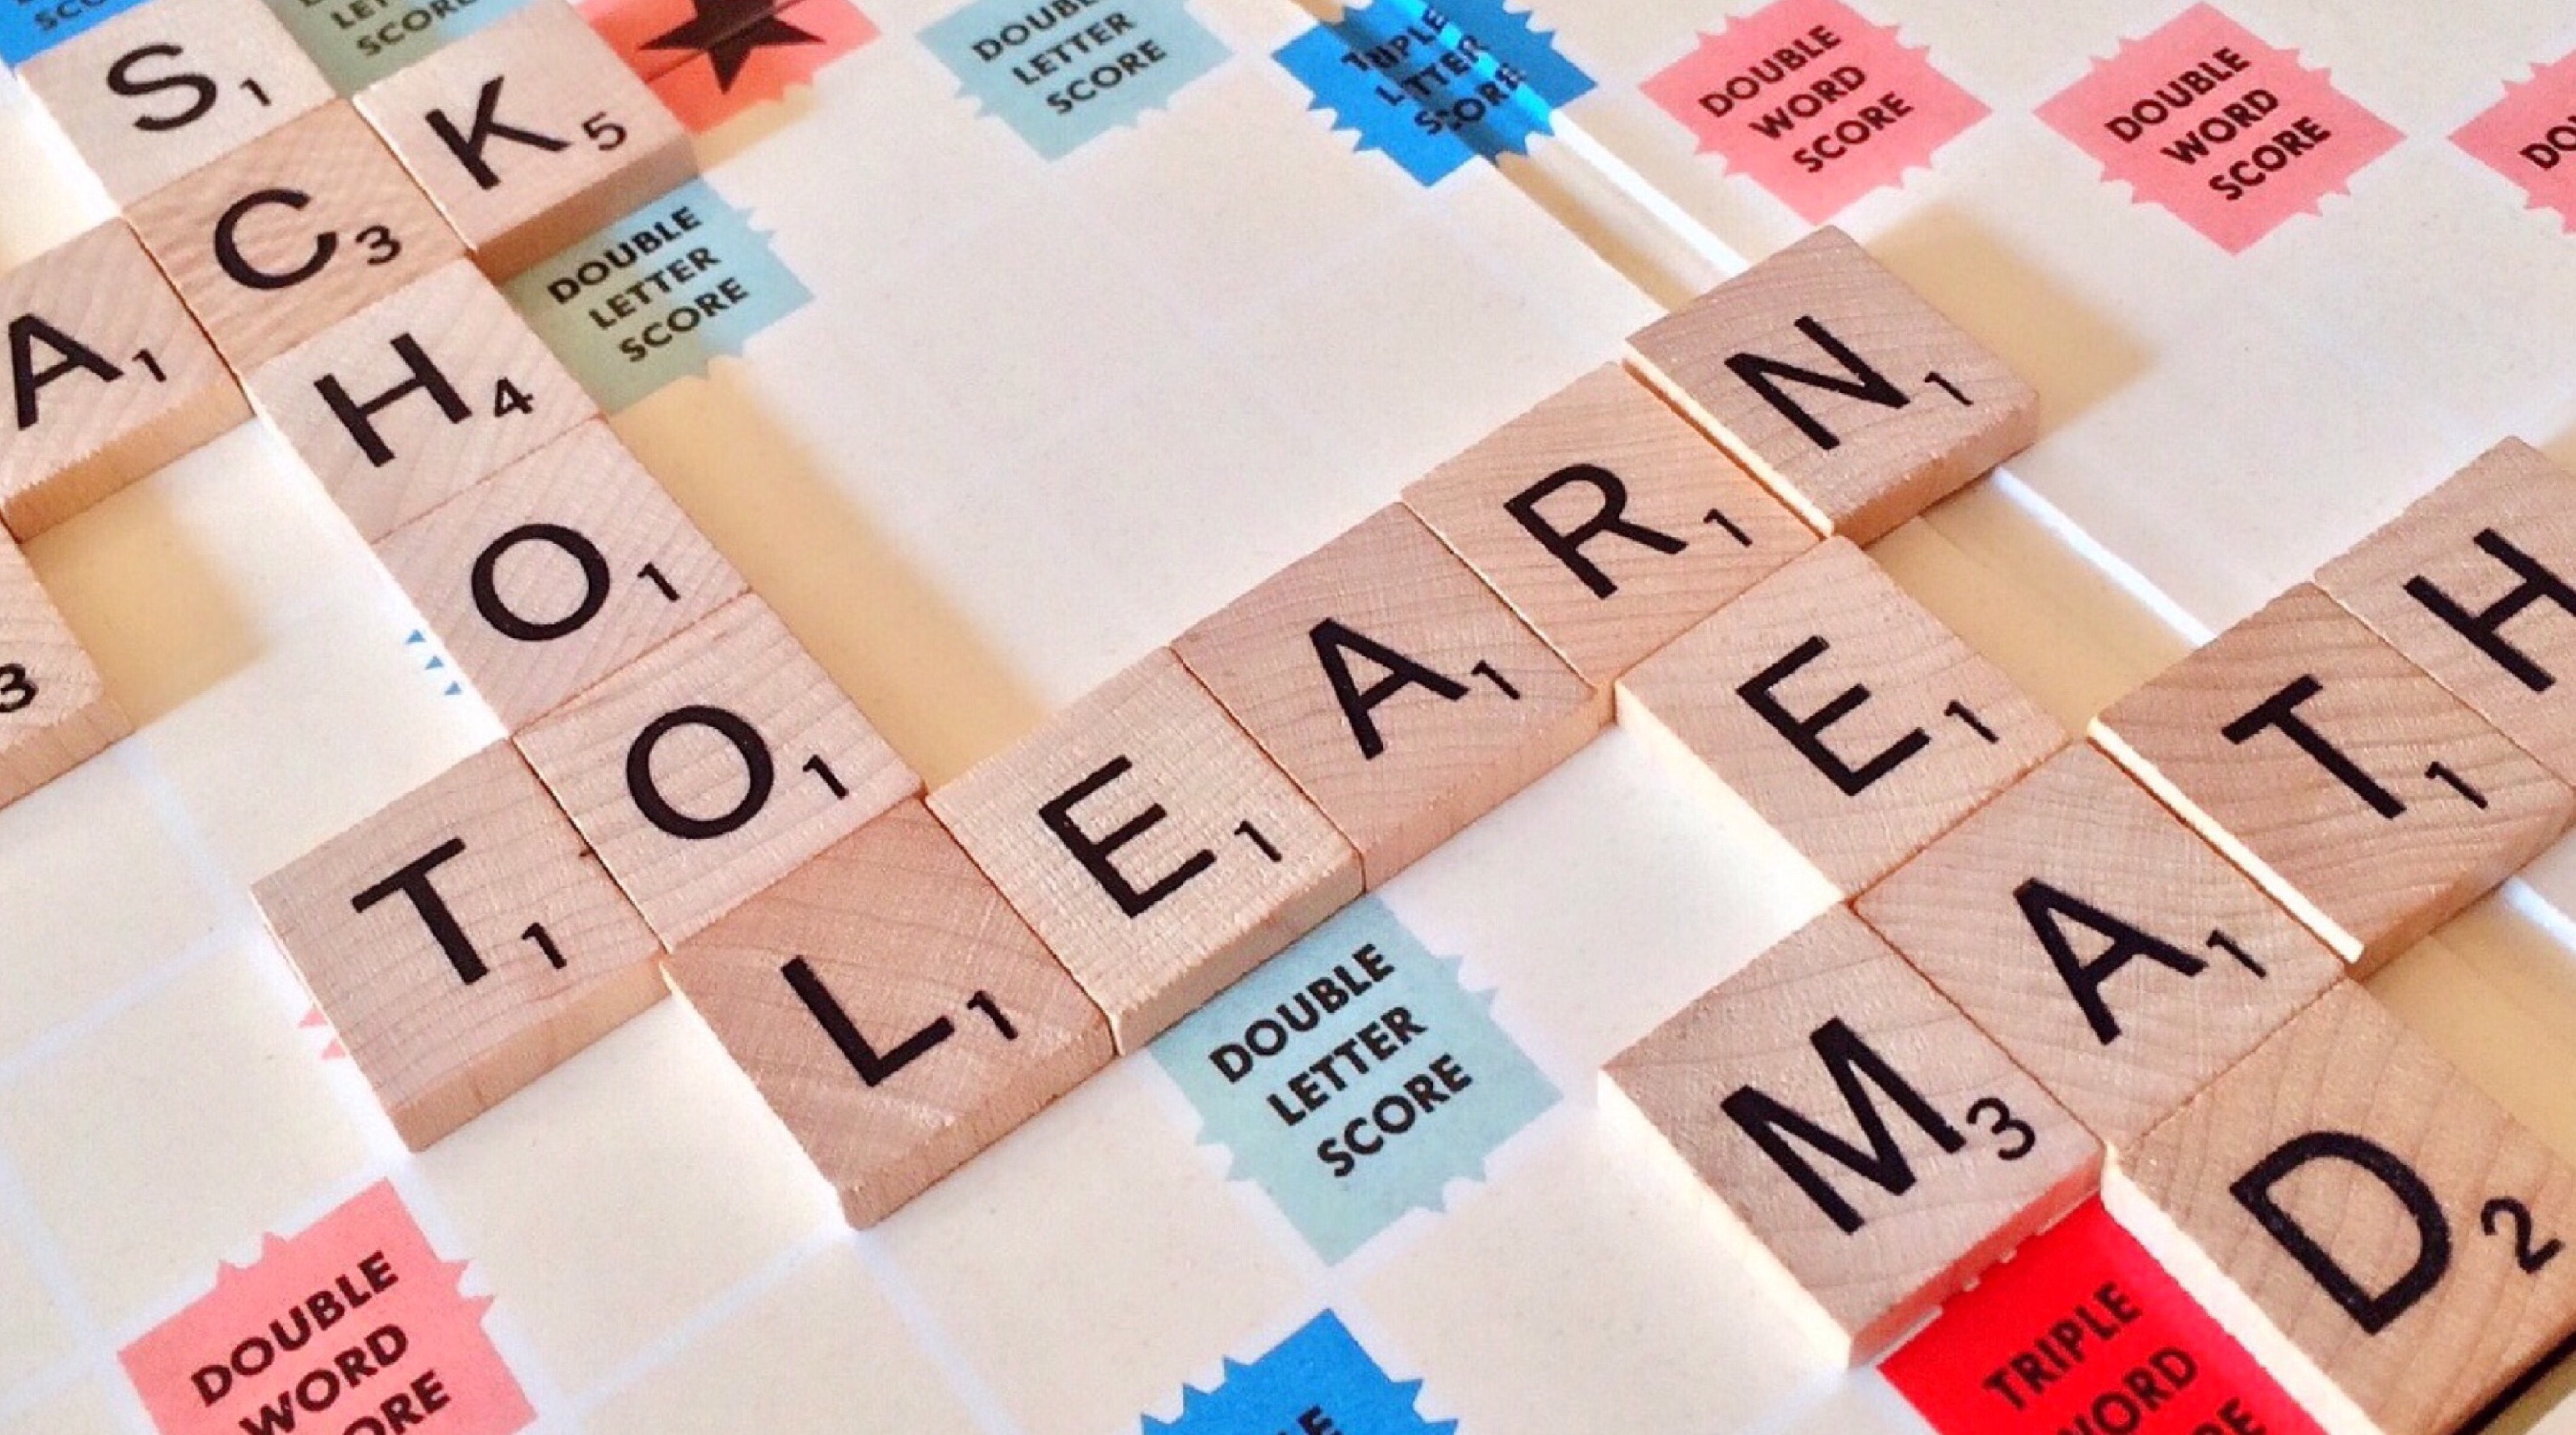 Scrabble tiles spelling out Learning and School; image by Pixabay, via Pexels.com.